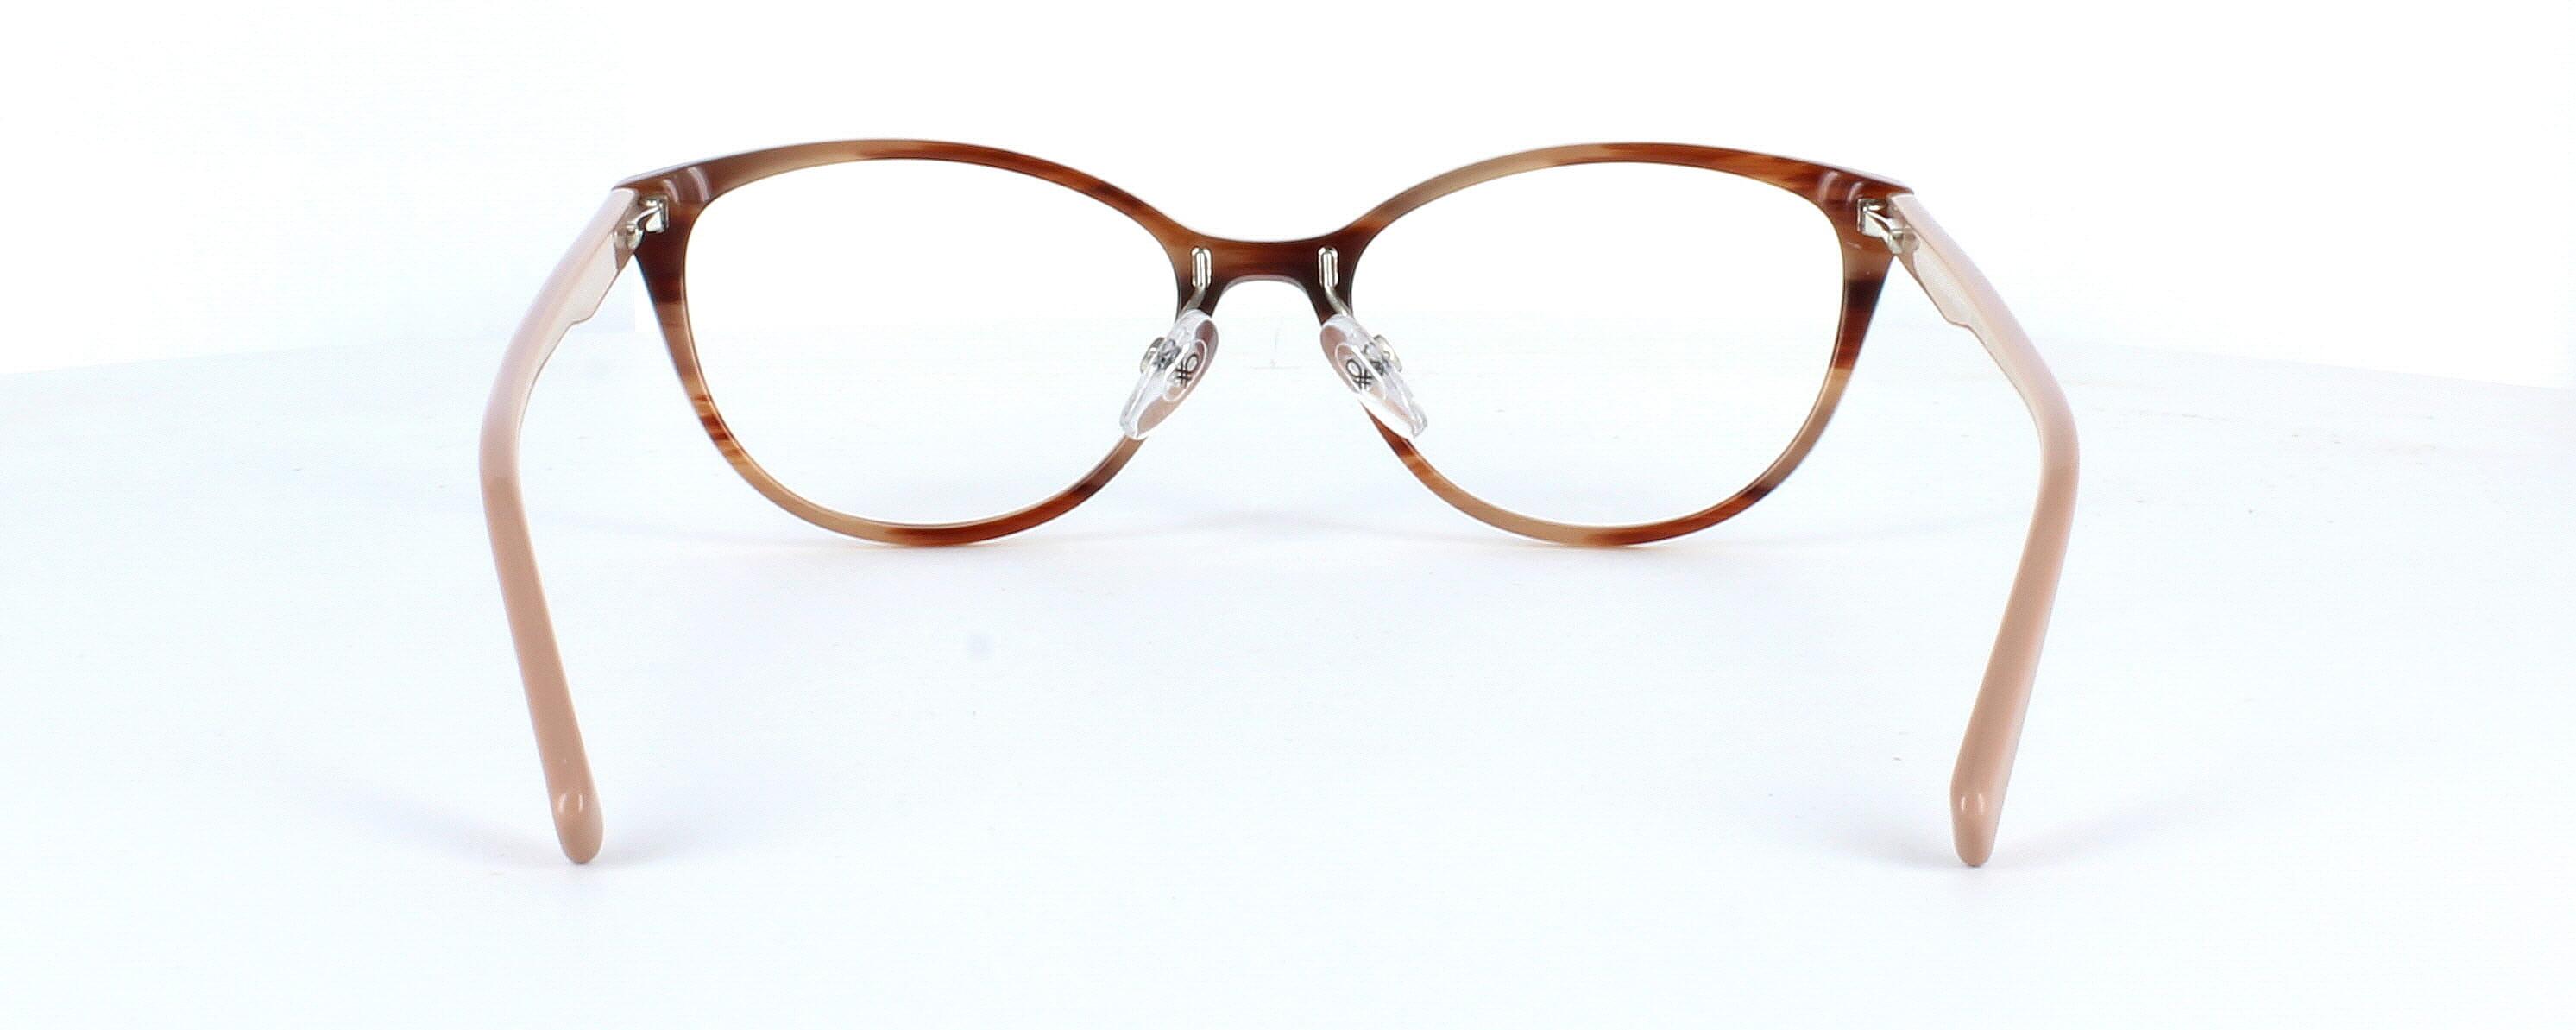 Benetton BEO1004 151 - Matt tortoise oval coloured frame with beige sprung hinged arms - image view 4